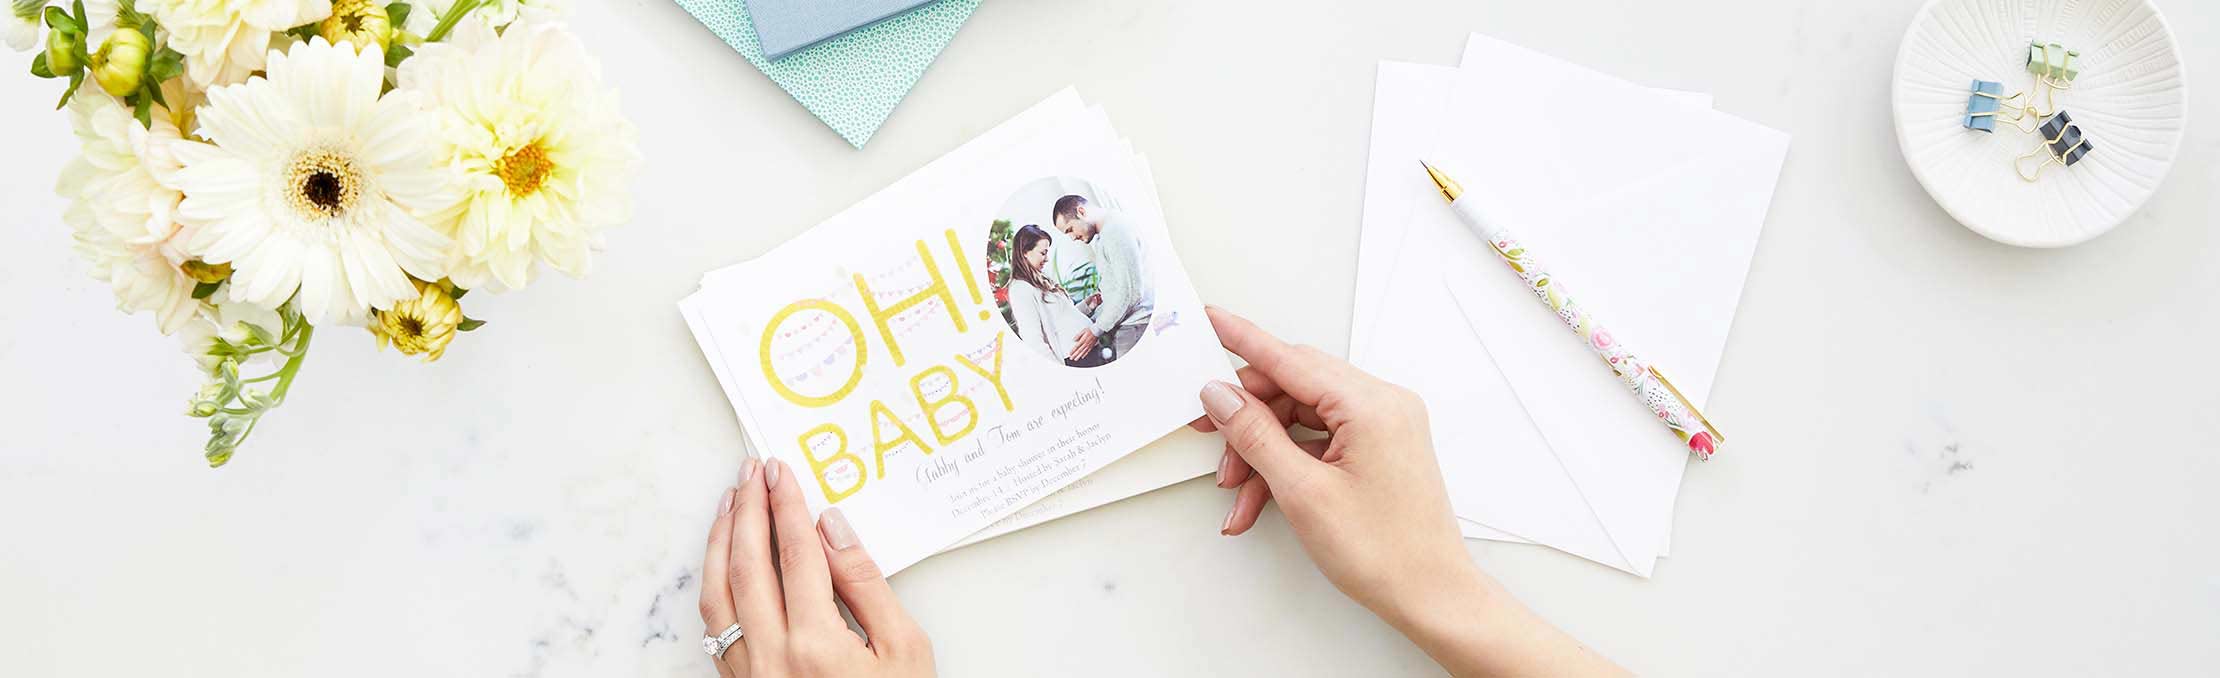 How to Word Invitations for Coed Baby Shower